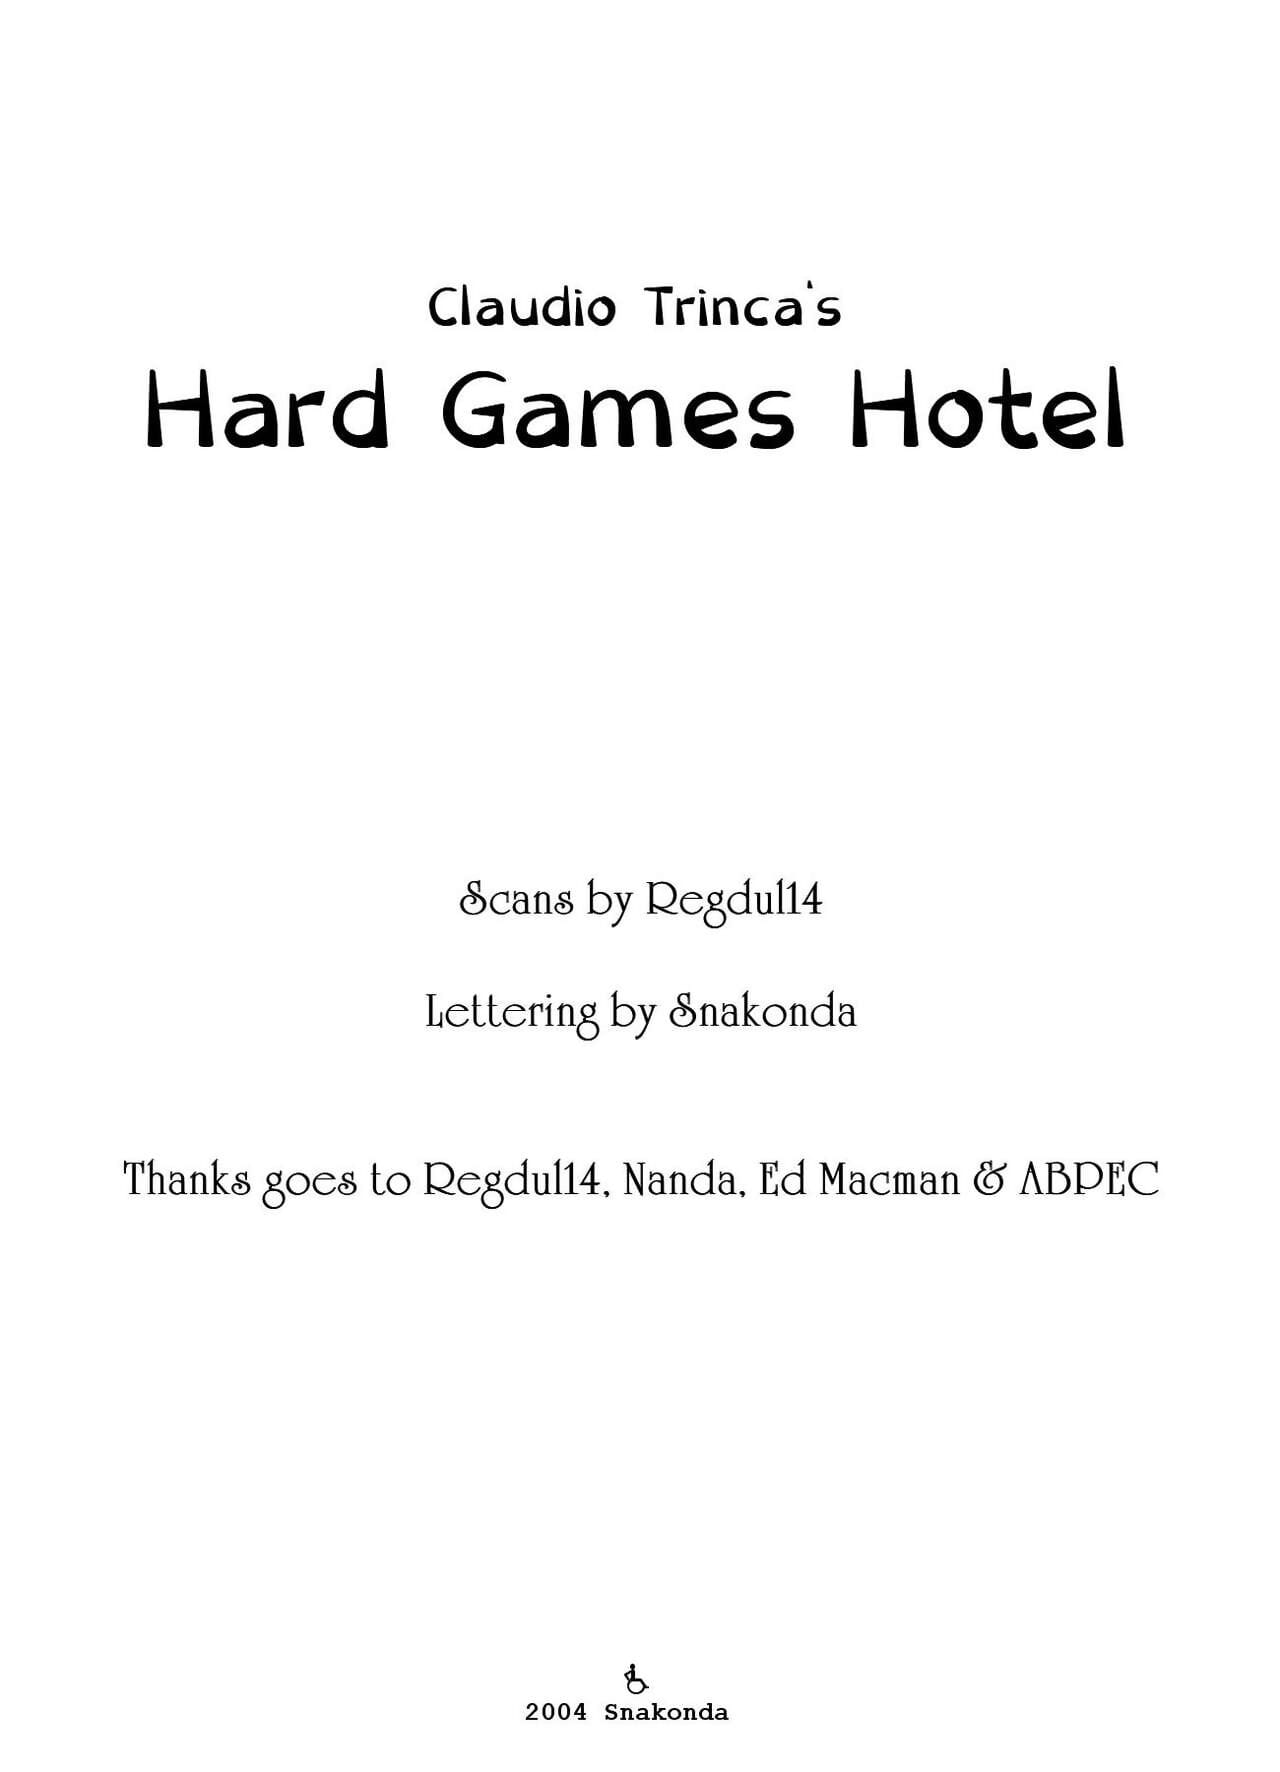 Hard Games Hotel page 1